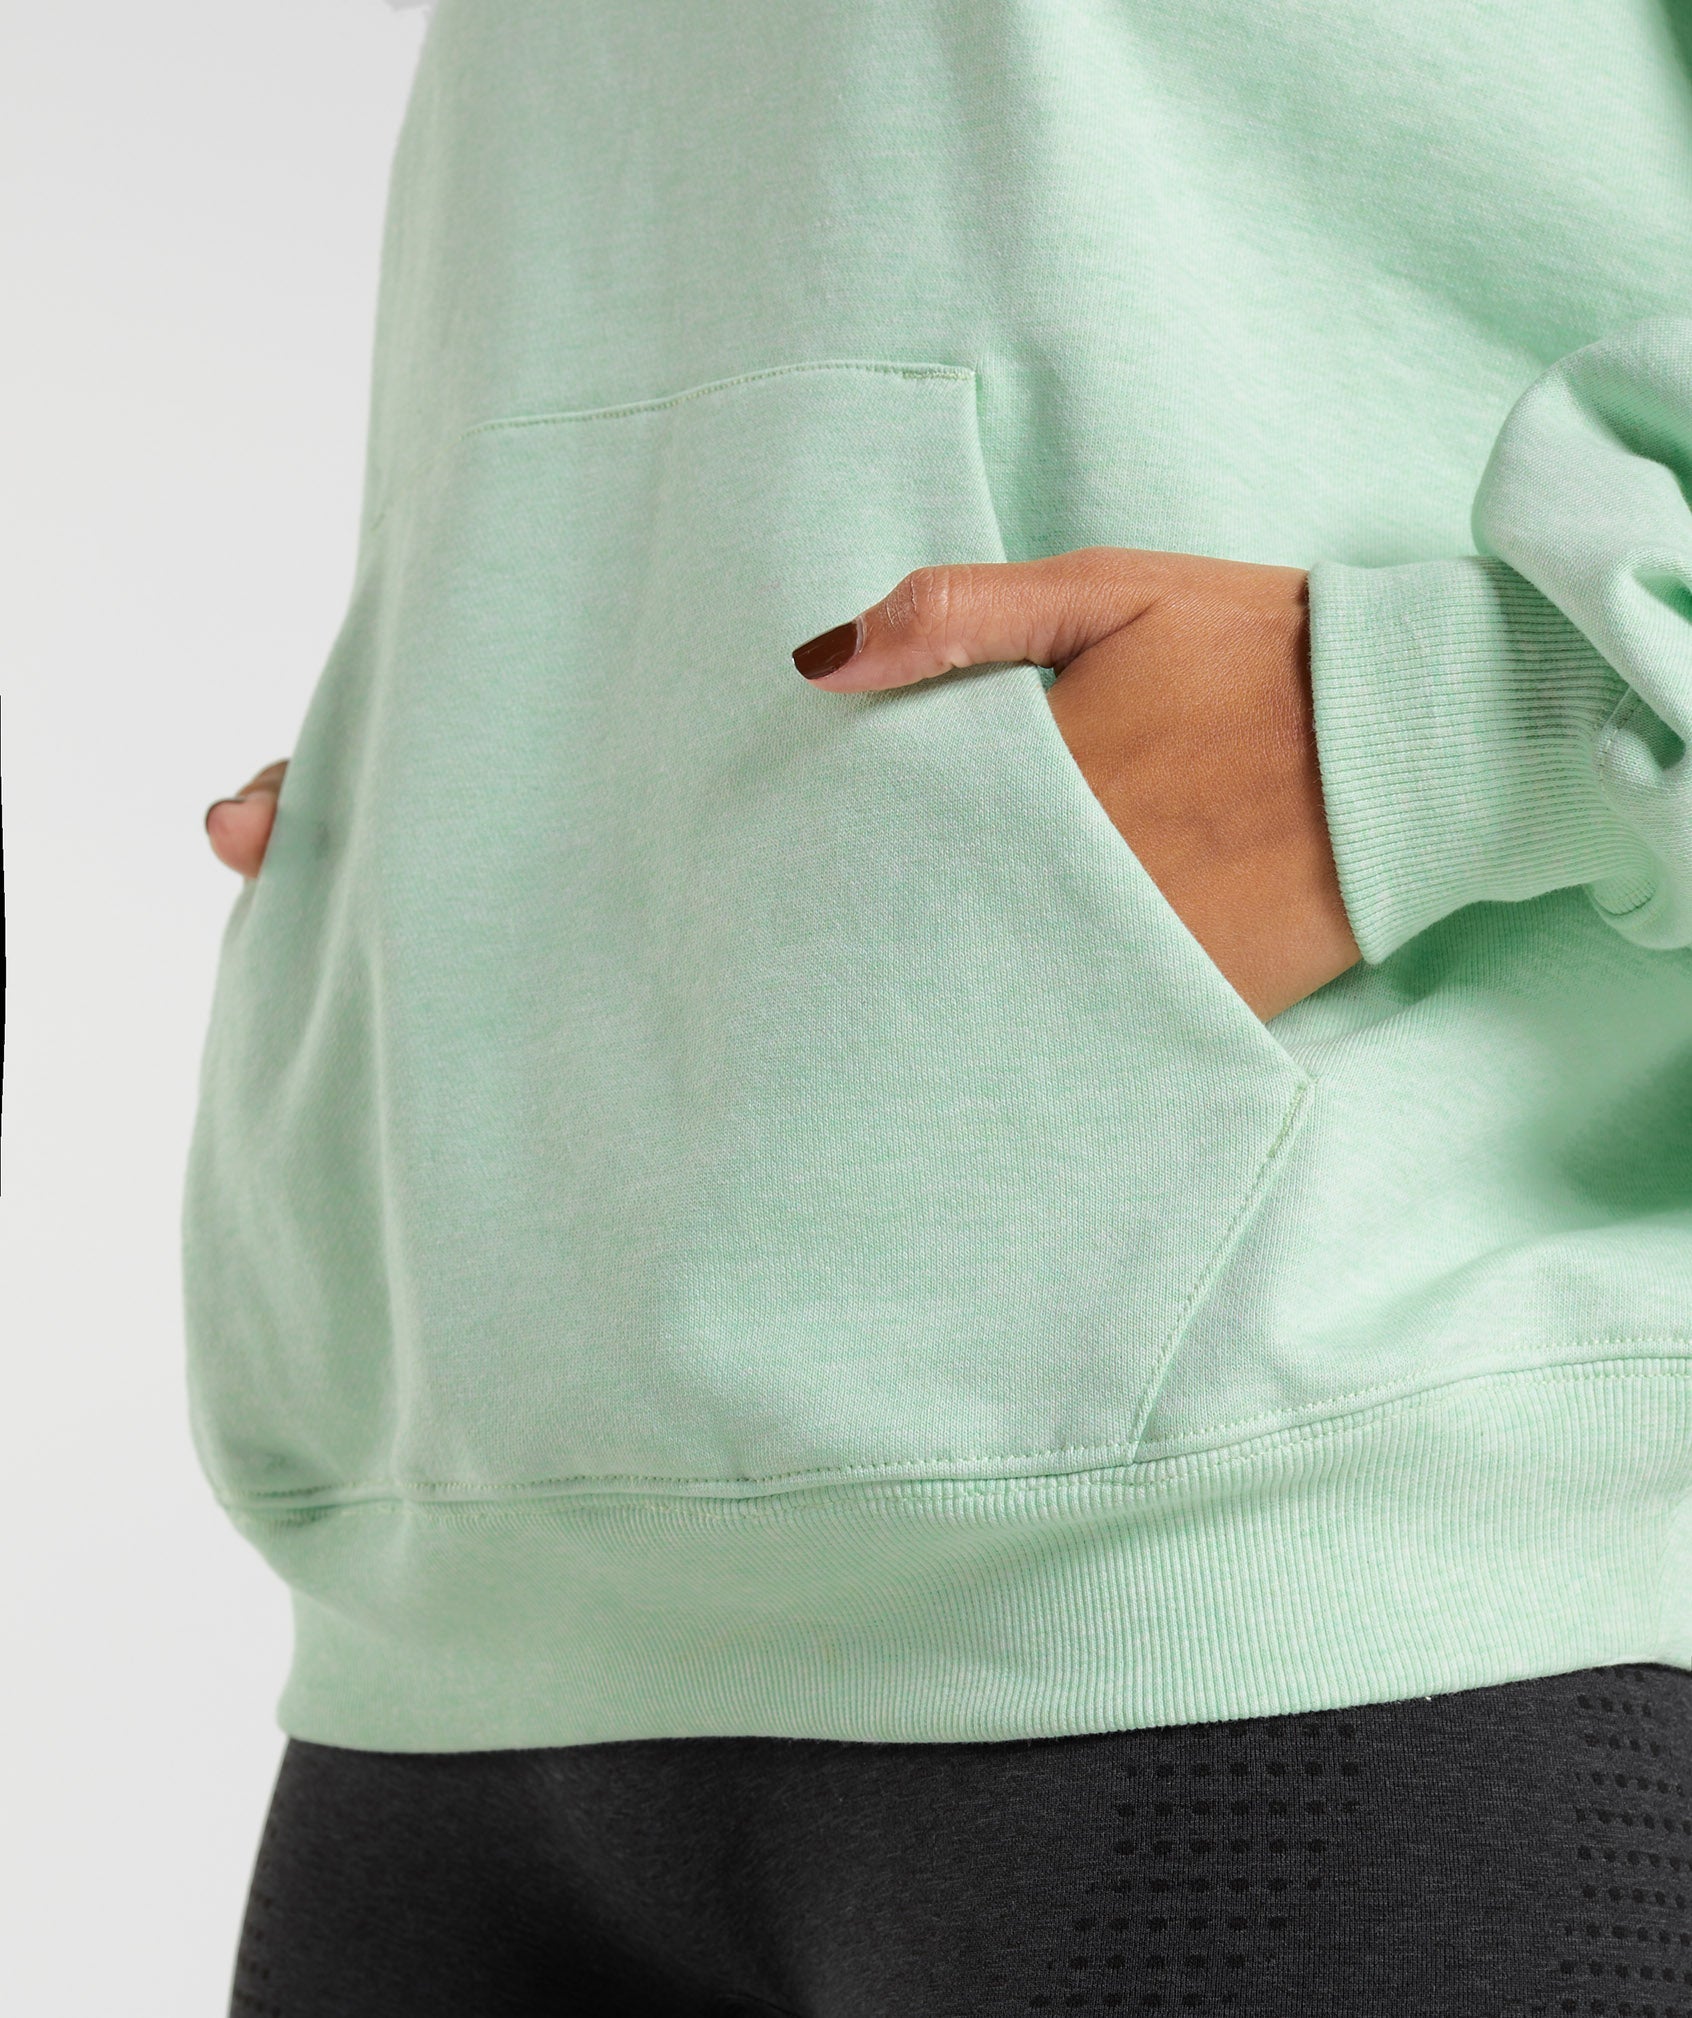 Rest Day Sweats 1/2 Zip Pullover in Refreshing Green Marl - view 7